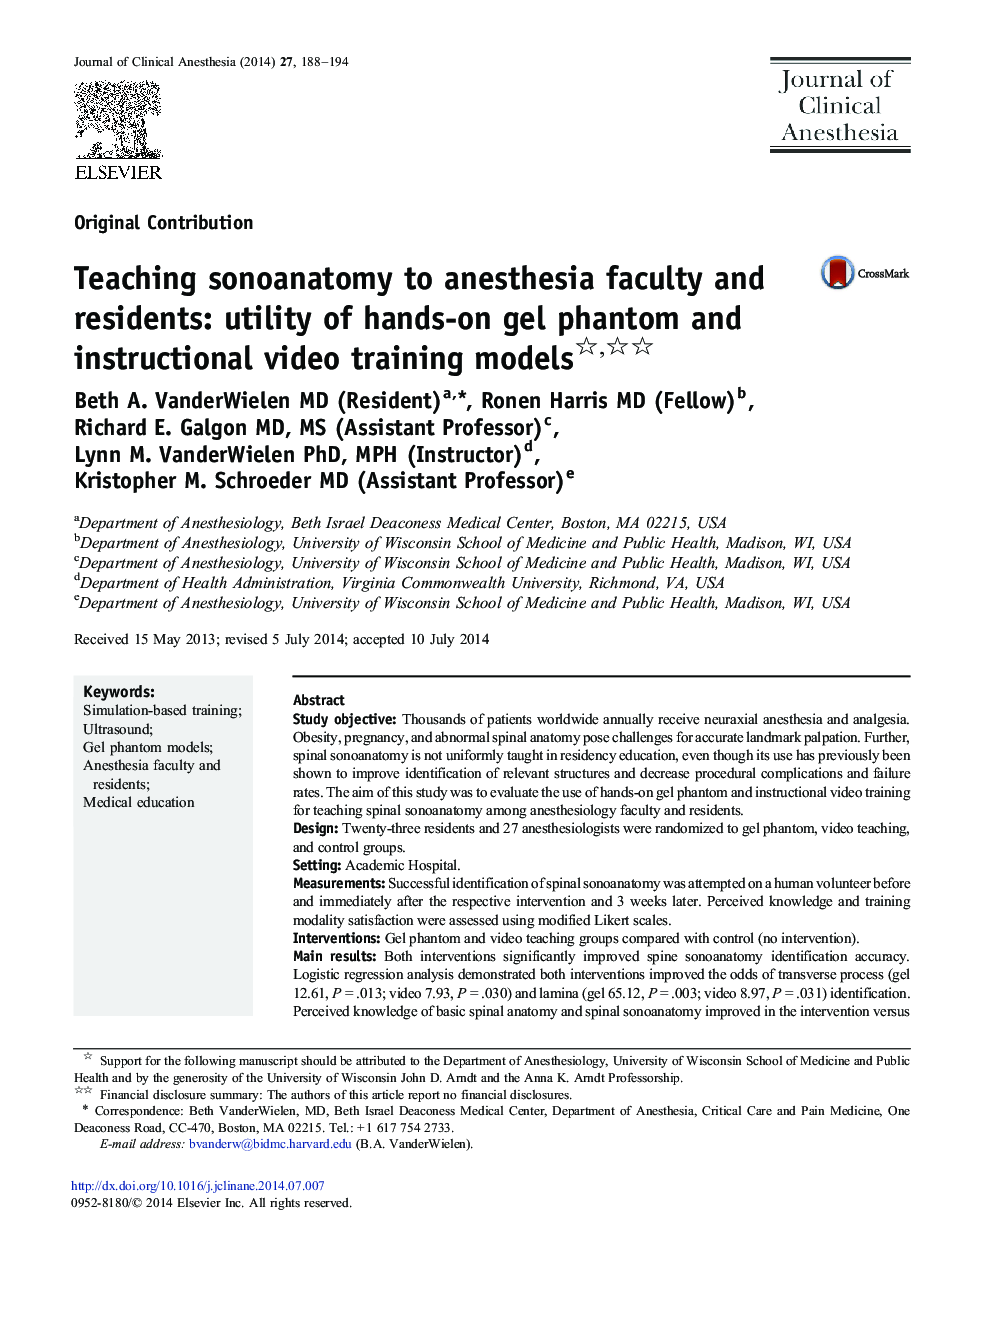 Teaching sonoanatomy to anesthesia faculty and residents: utility of hands-on gel phantom and instructional video training models 